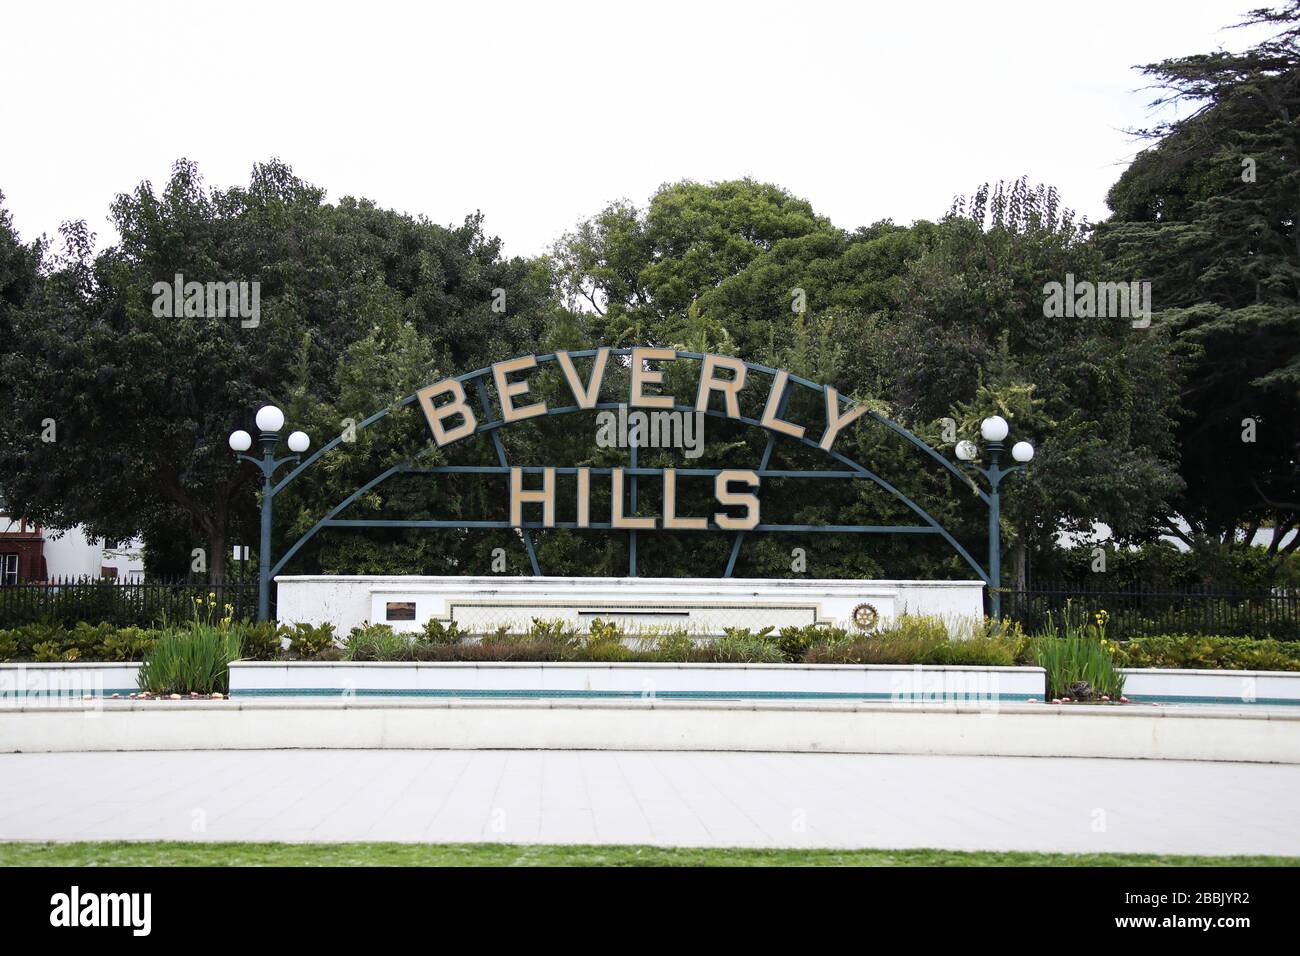 BEVERLY HILLS, LOS ANGELES, CALIFORNIA, USA - MARCH 31: A view of